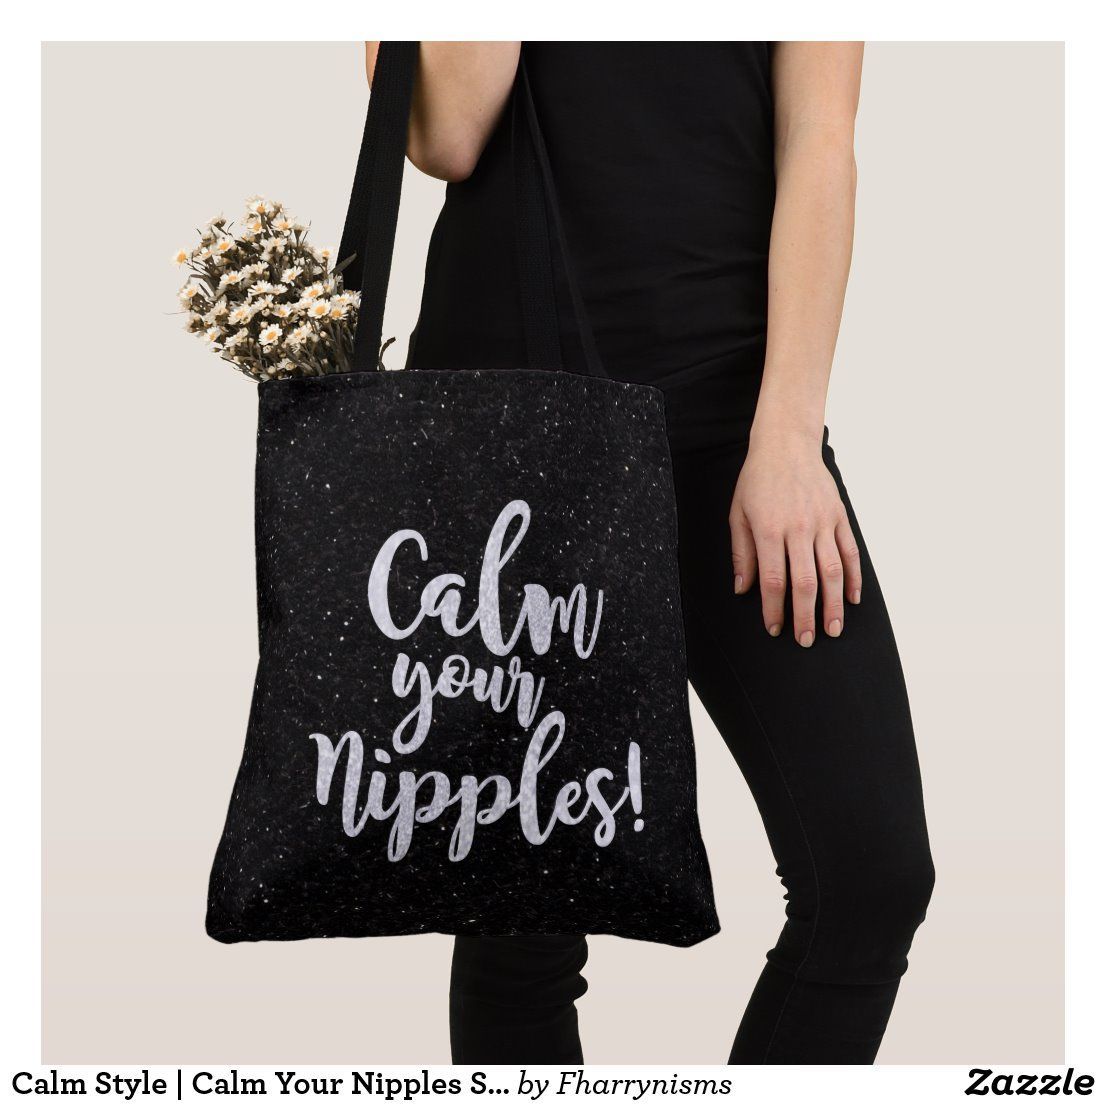 Calm Style | Calm Your Nipples Sassy Quote Humor Tote Bag - Calm Style | Calm Your Nipples Sassy Quote Humor Tote Bag -   16 couple style Quotes ideas